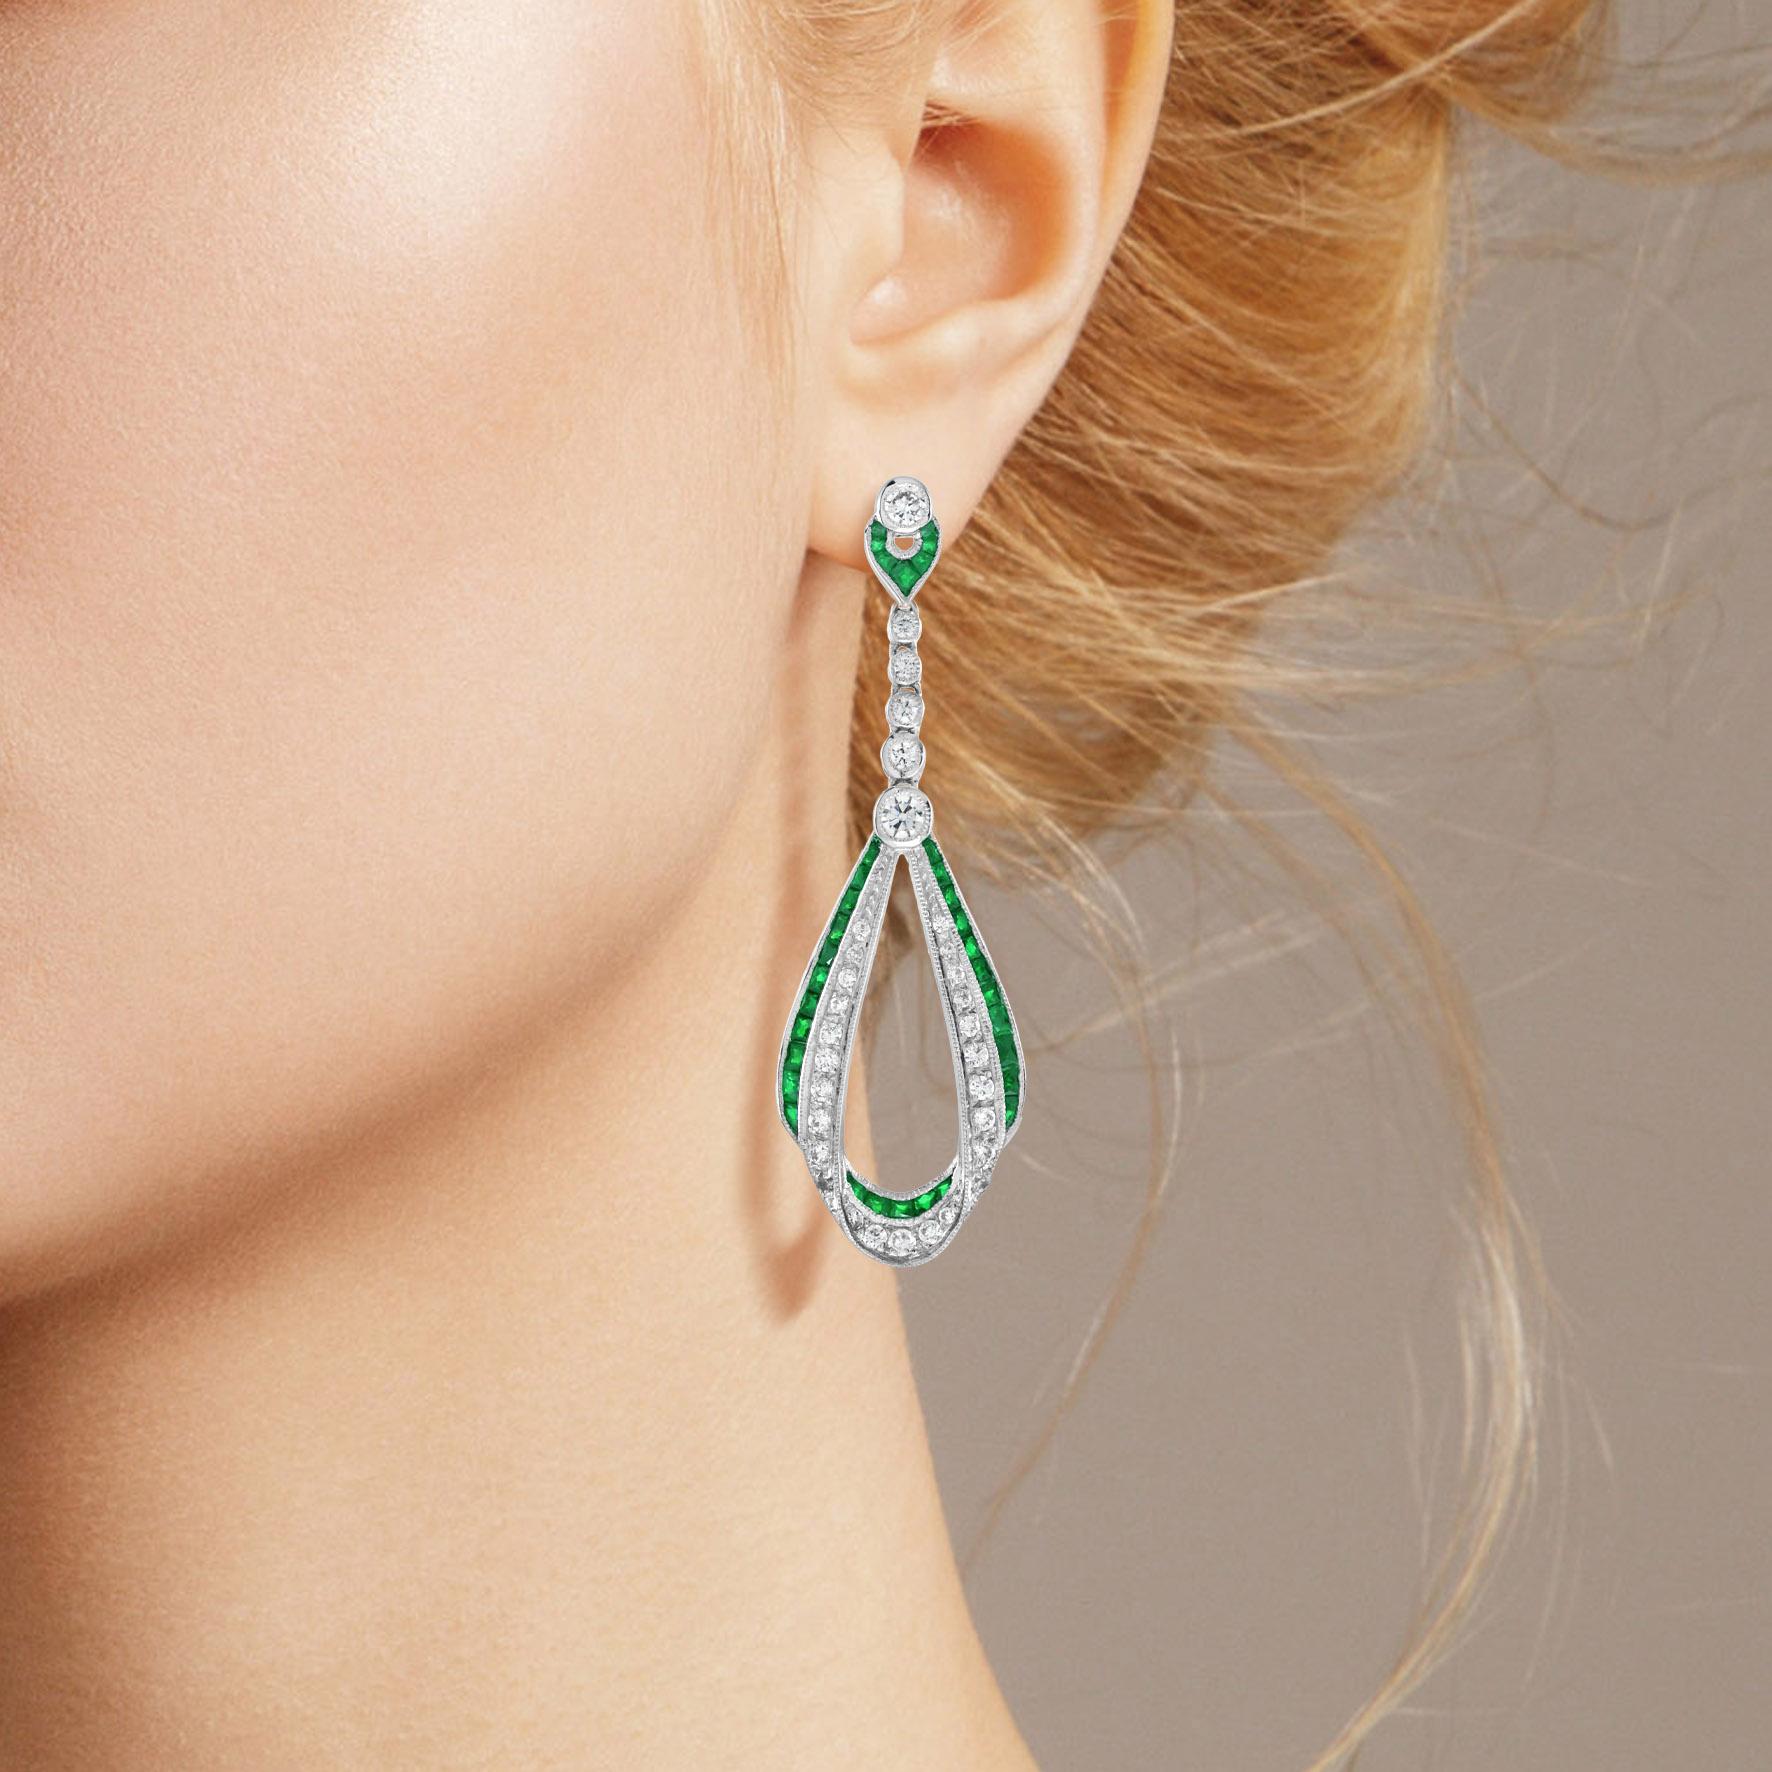 These Art Deco style drop earrings are absolutely stunning, extraordinary. Over 5 carats of vivid and exceptional emeralds border the edge of earrings. And 0.89 carats of fine diamonds. Artful and precise work in the 18k white gold combine with